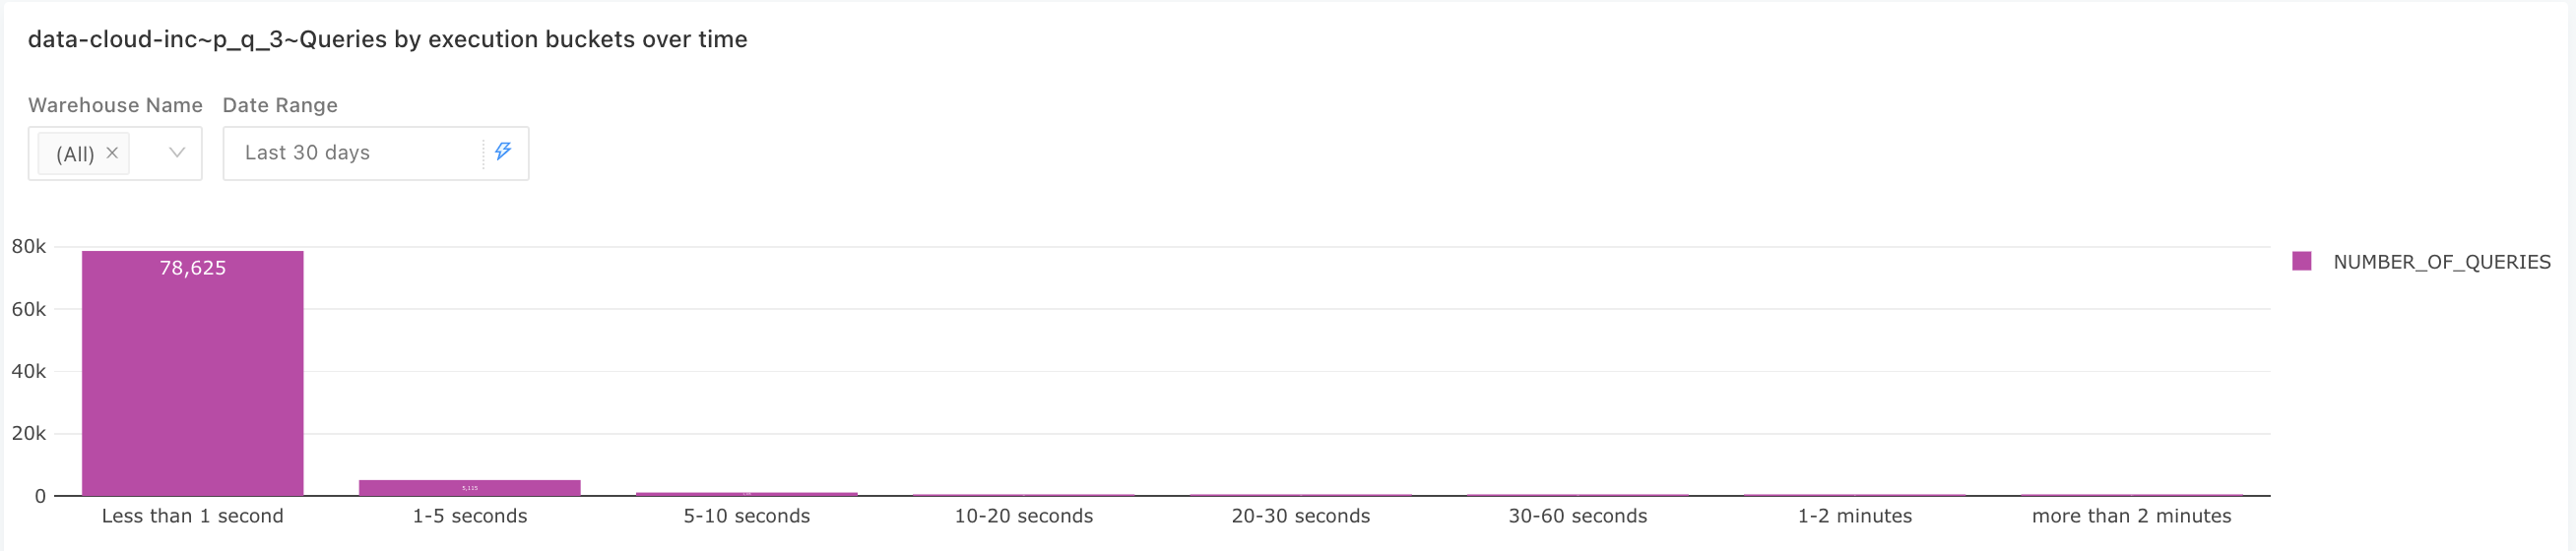 Queries by execution buckets over time